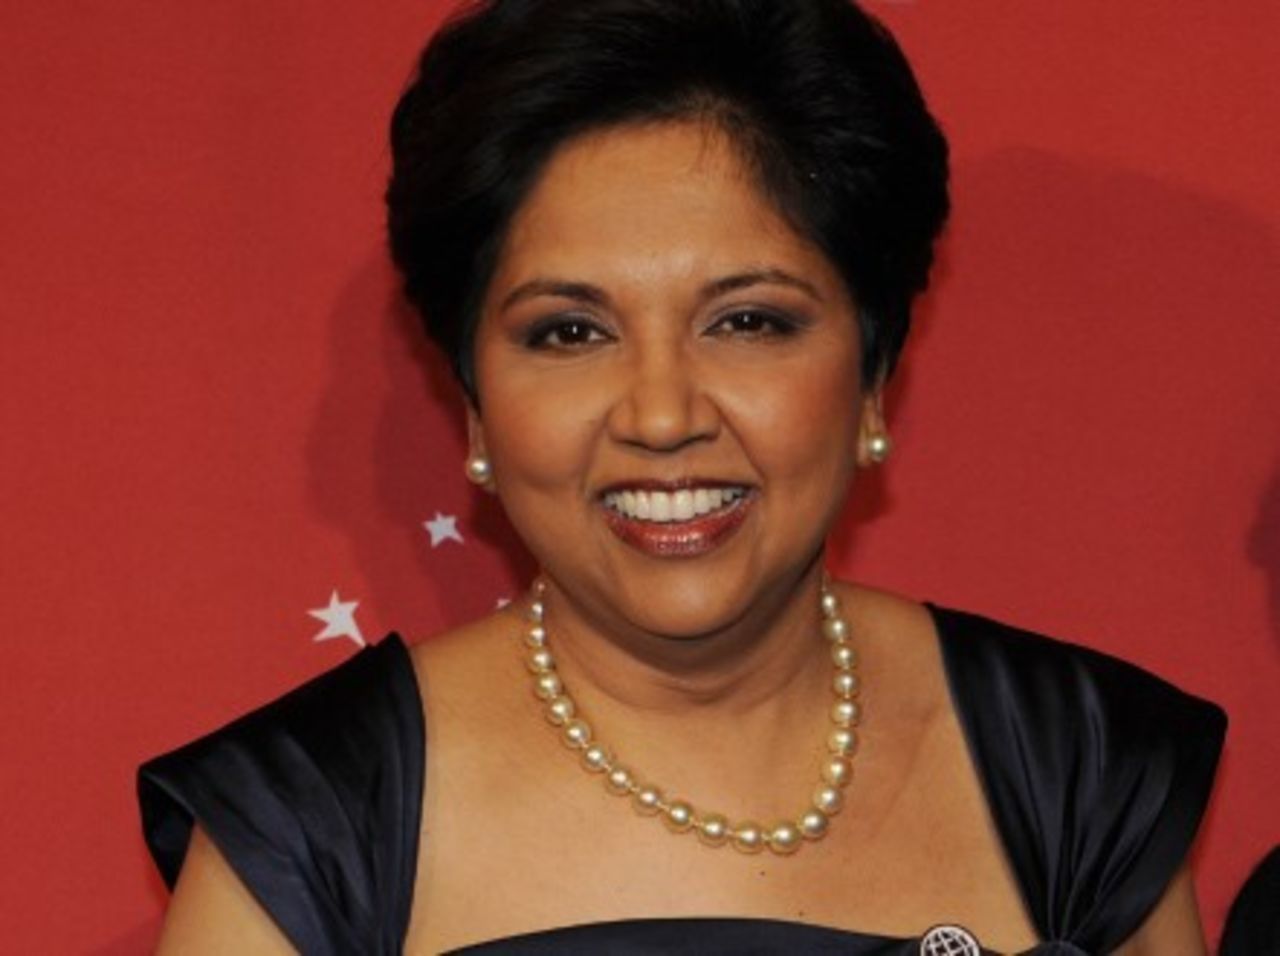 Indra Nooyi has been at PepsiCo almost two decades since she joined in 1994.